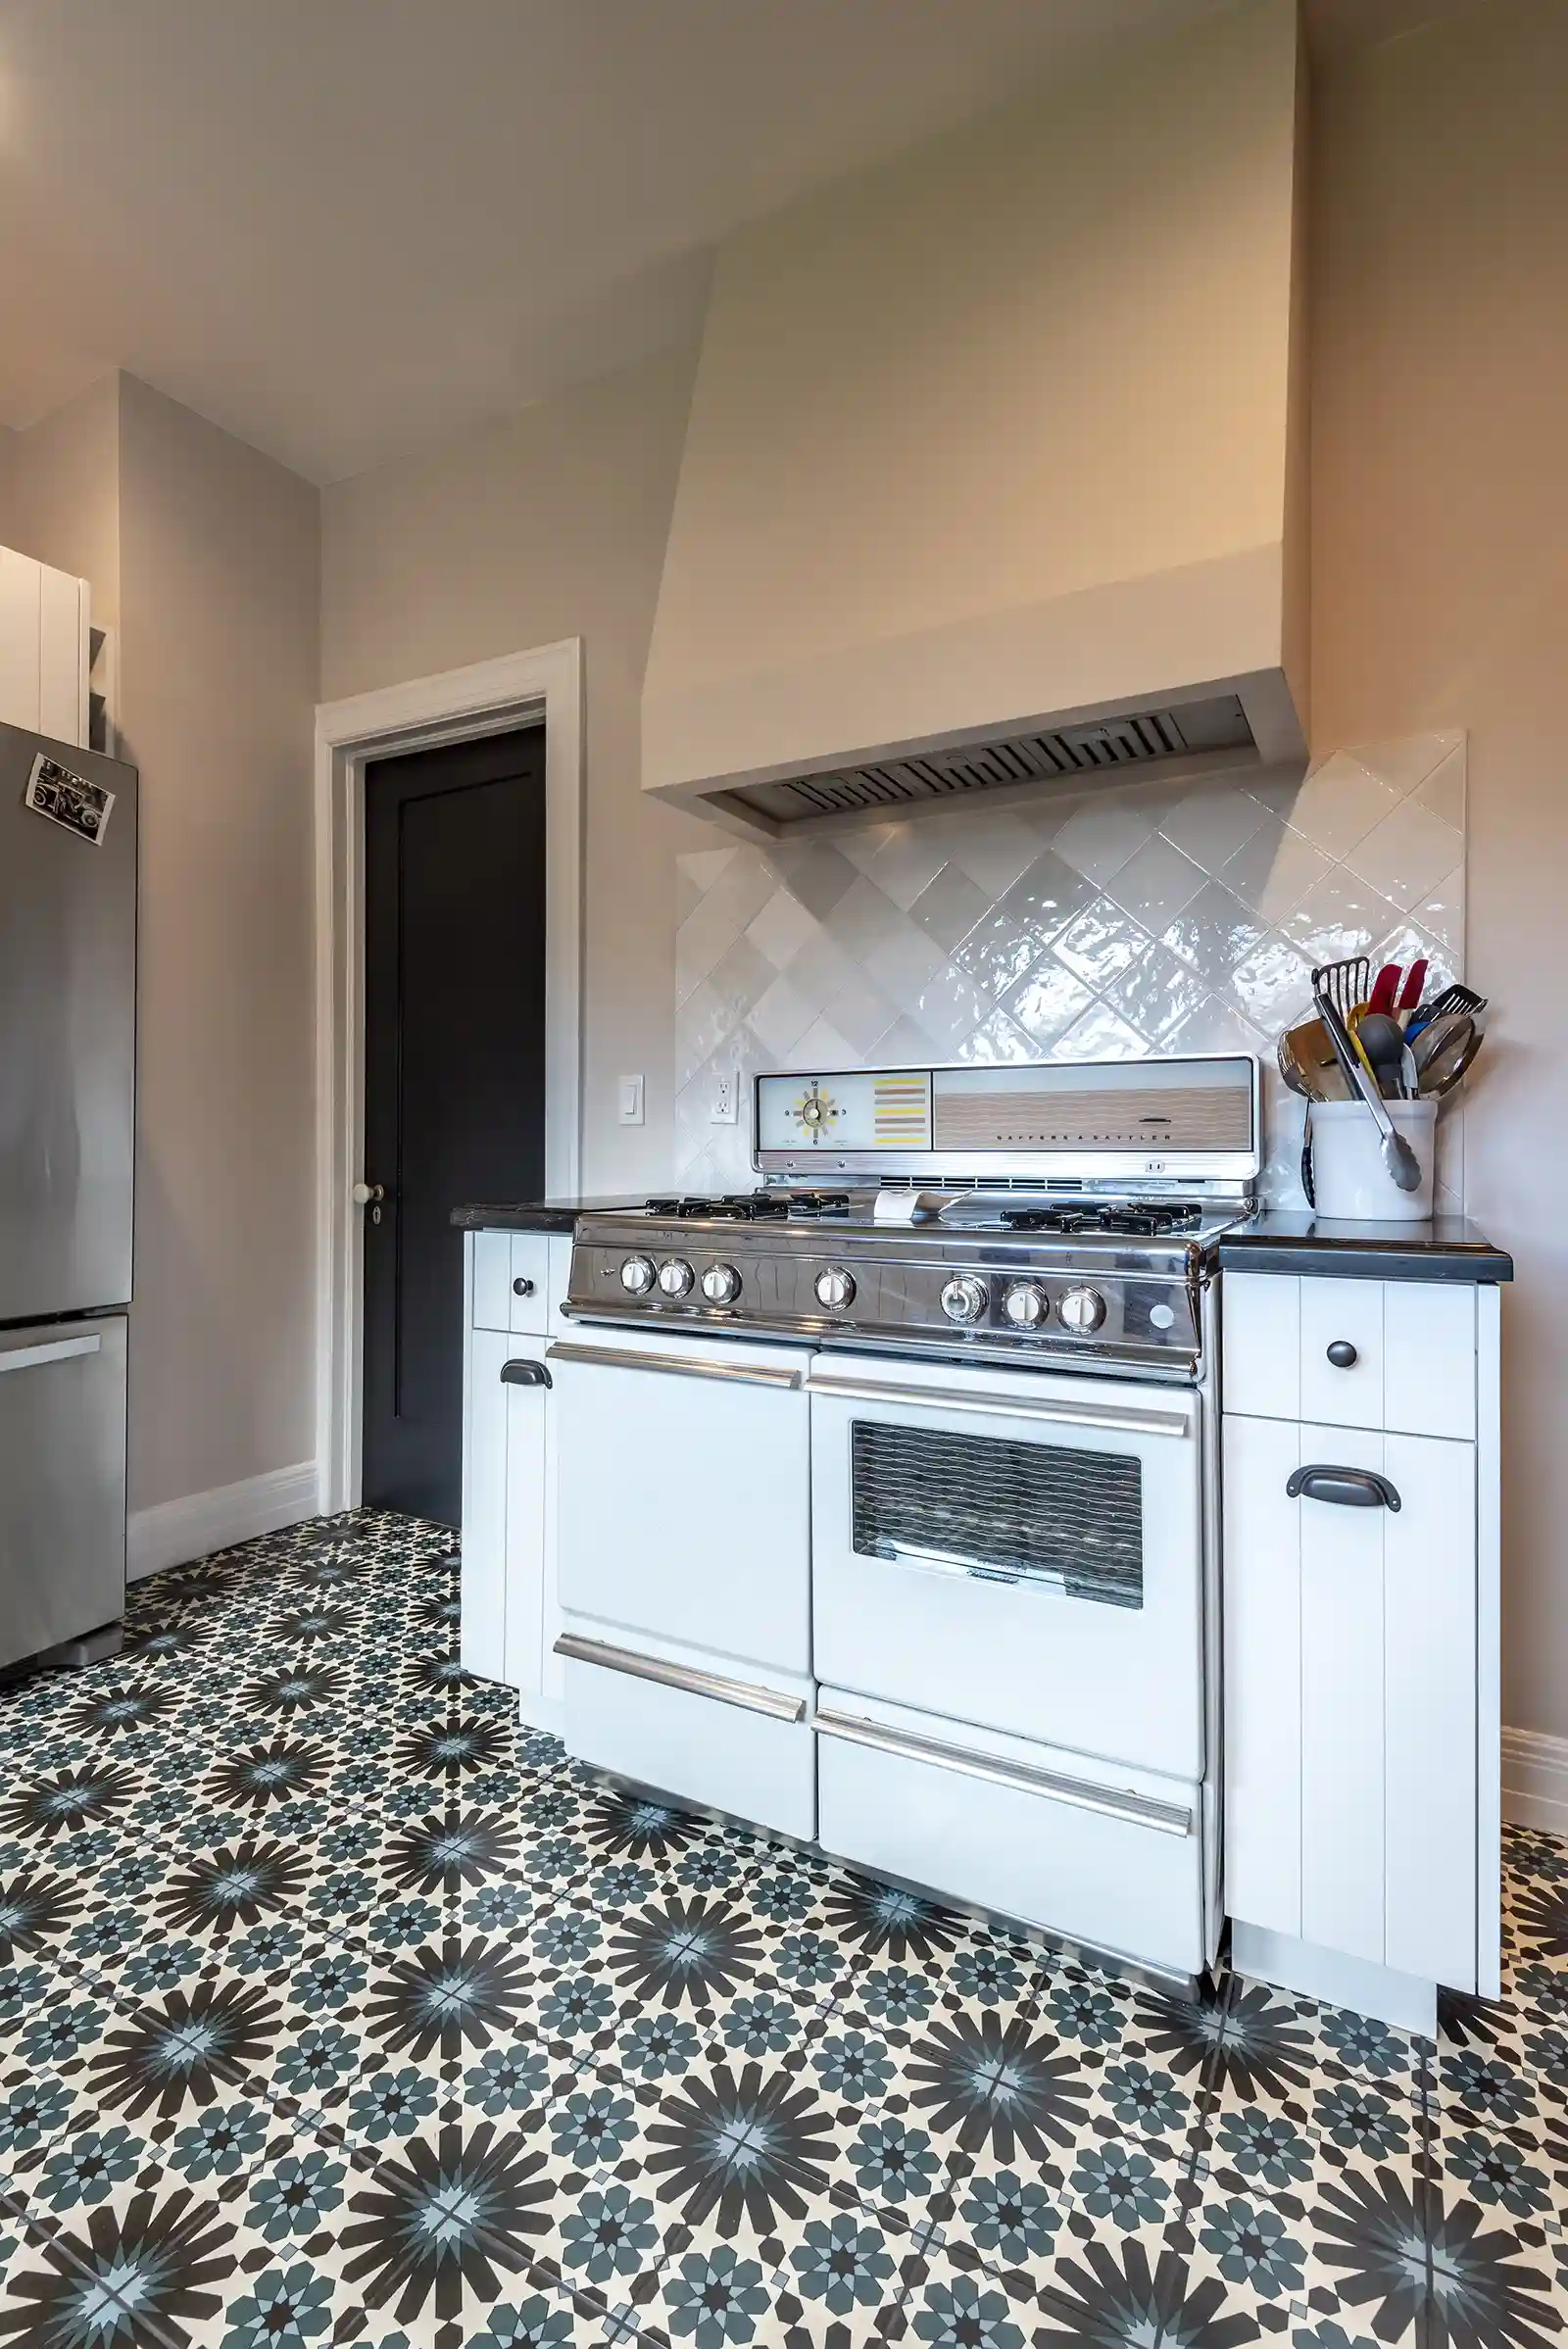 kitchen with white stove and patterned floor tile in home remodel in mid city